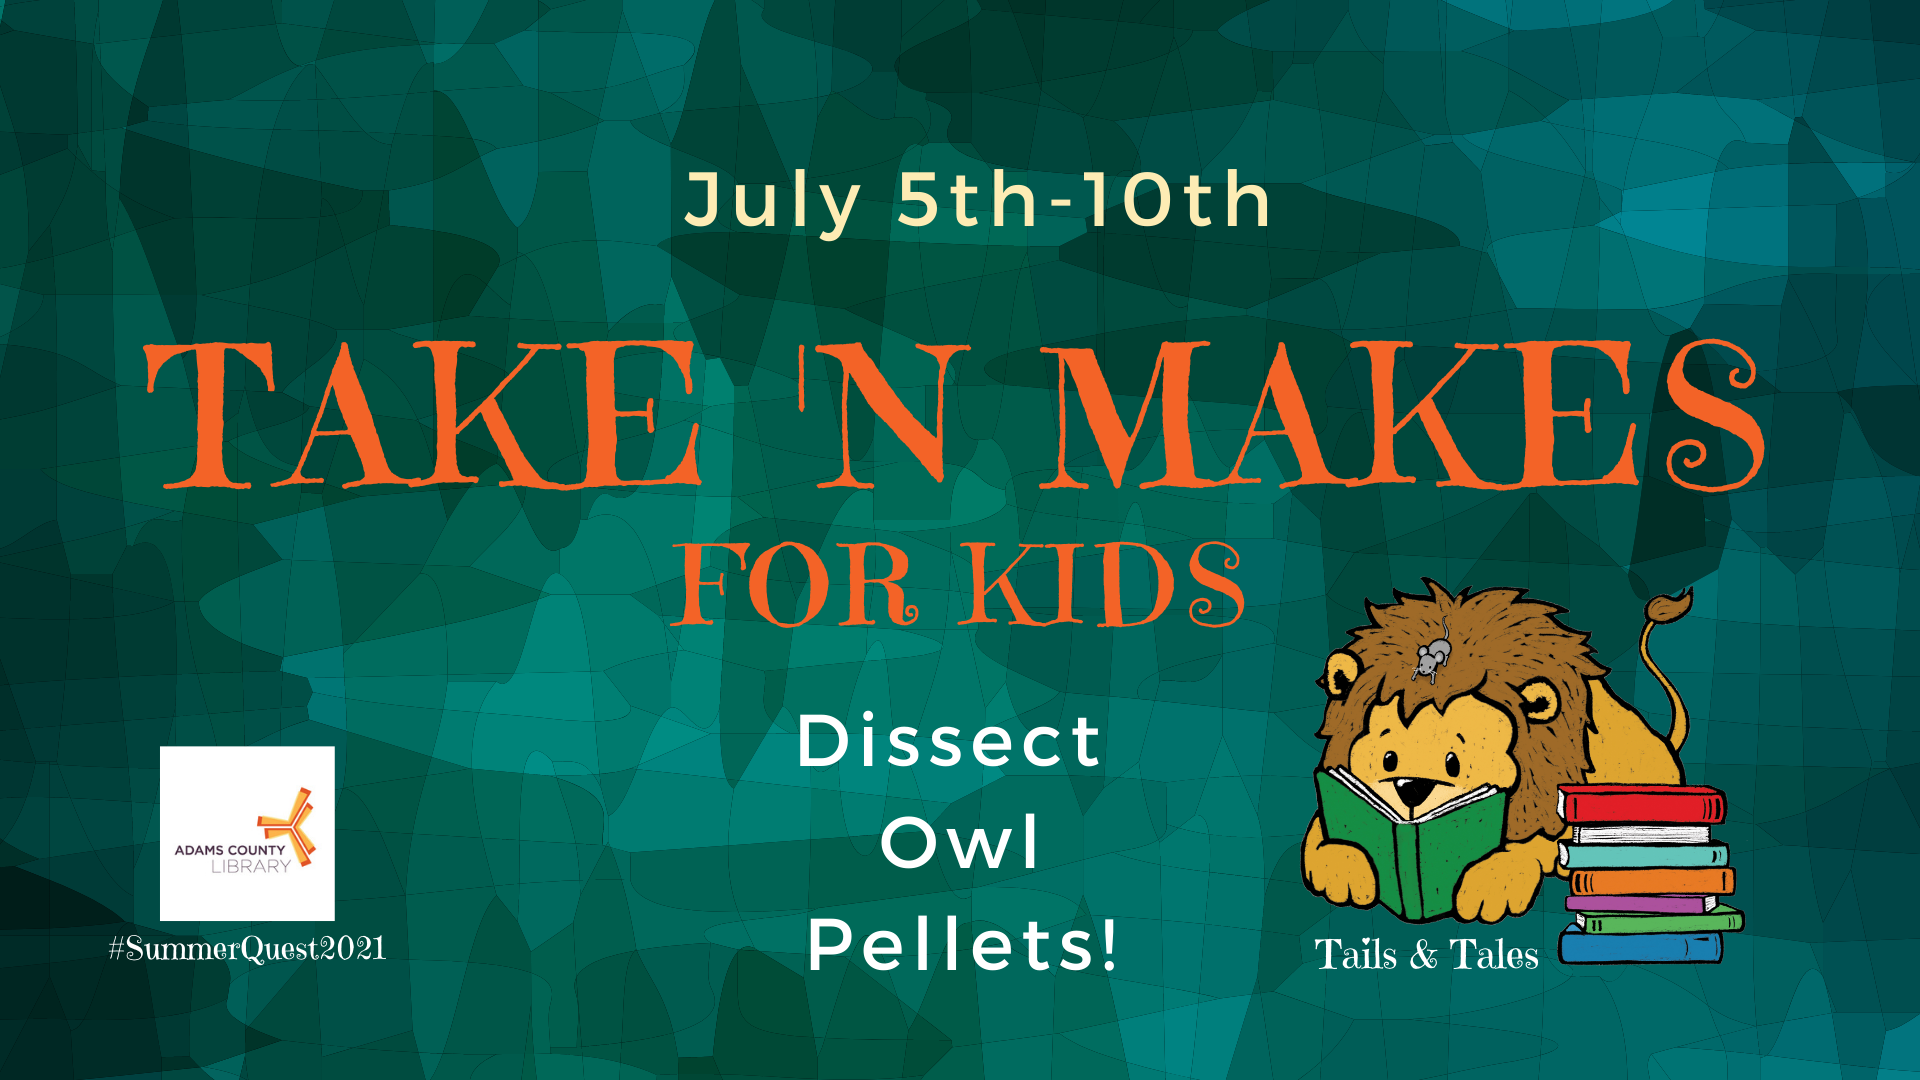 Pick up a Take n' Make for Kids from July 5th through July 10th. This week the project is Dissecting Owl Pellets!